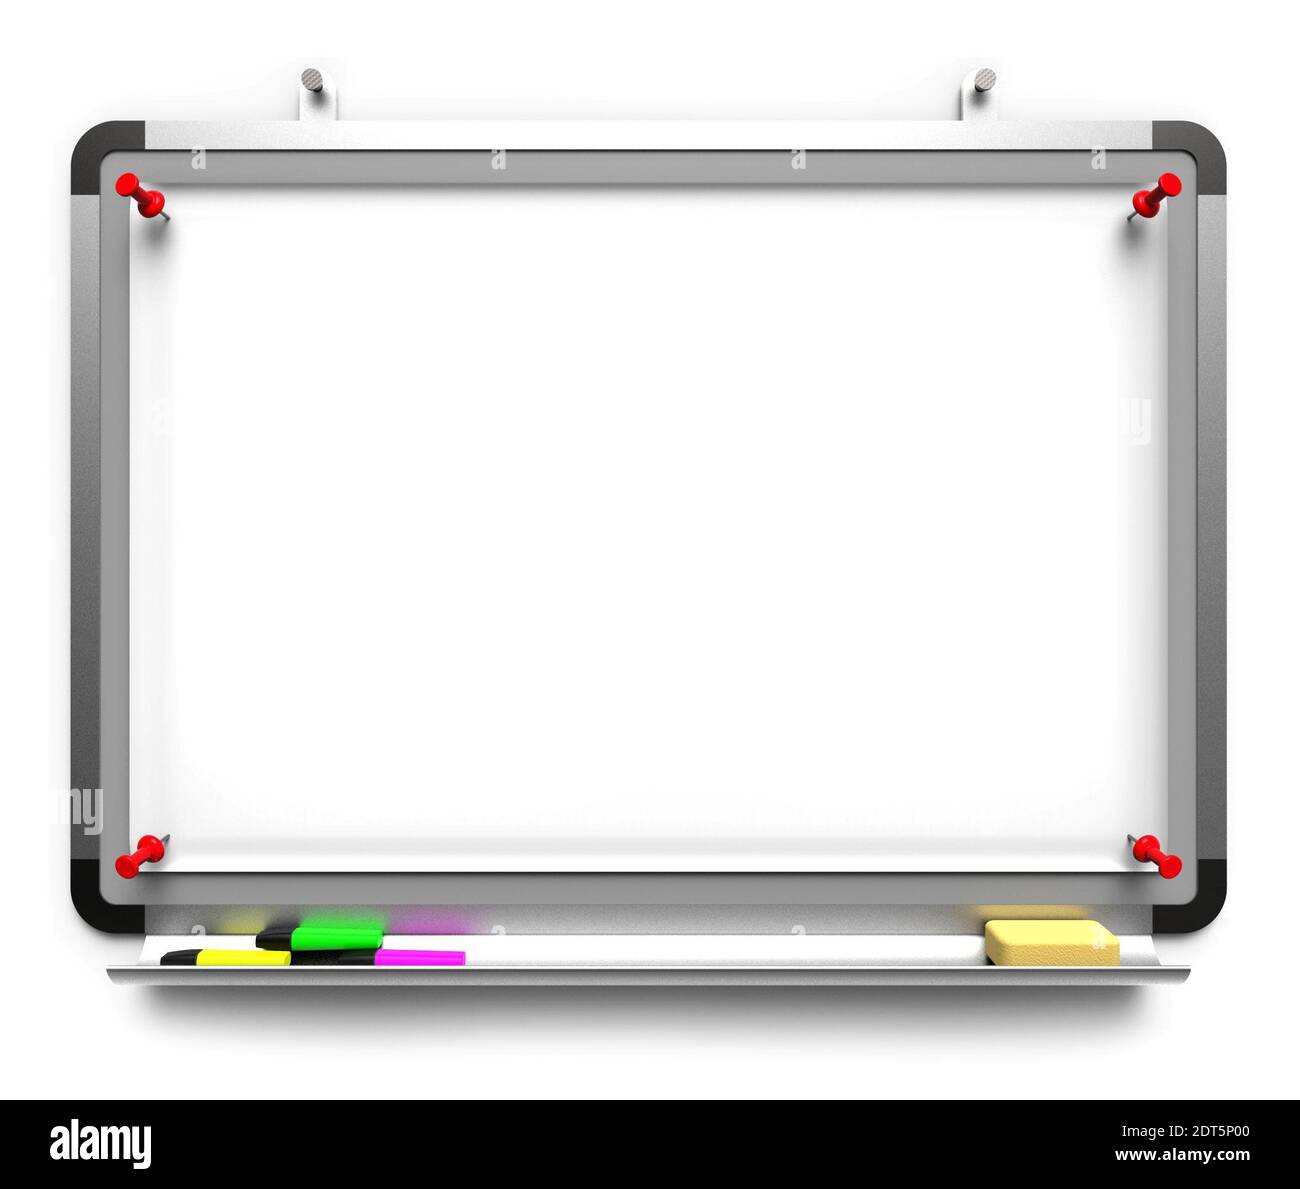 Flat Design Whiteboard Vector in Wooden Cabinet Background Stock